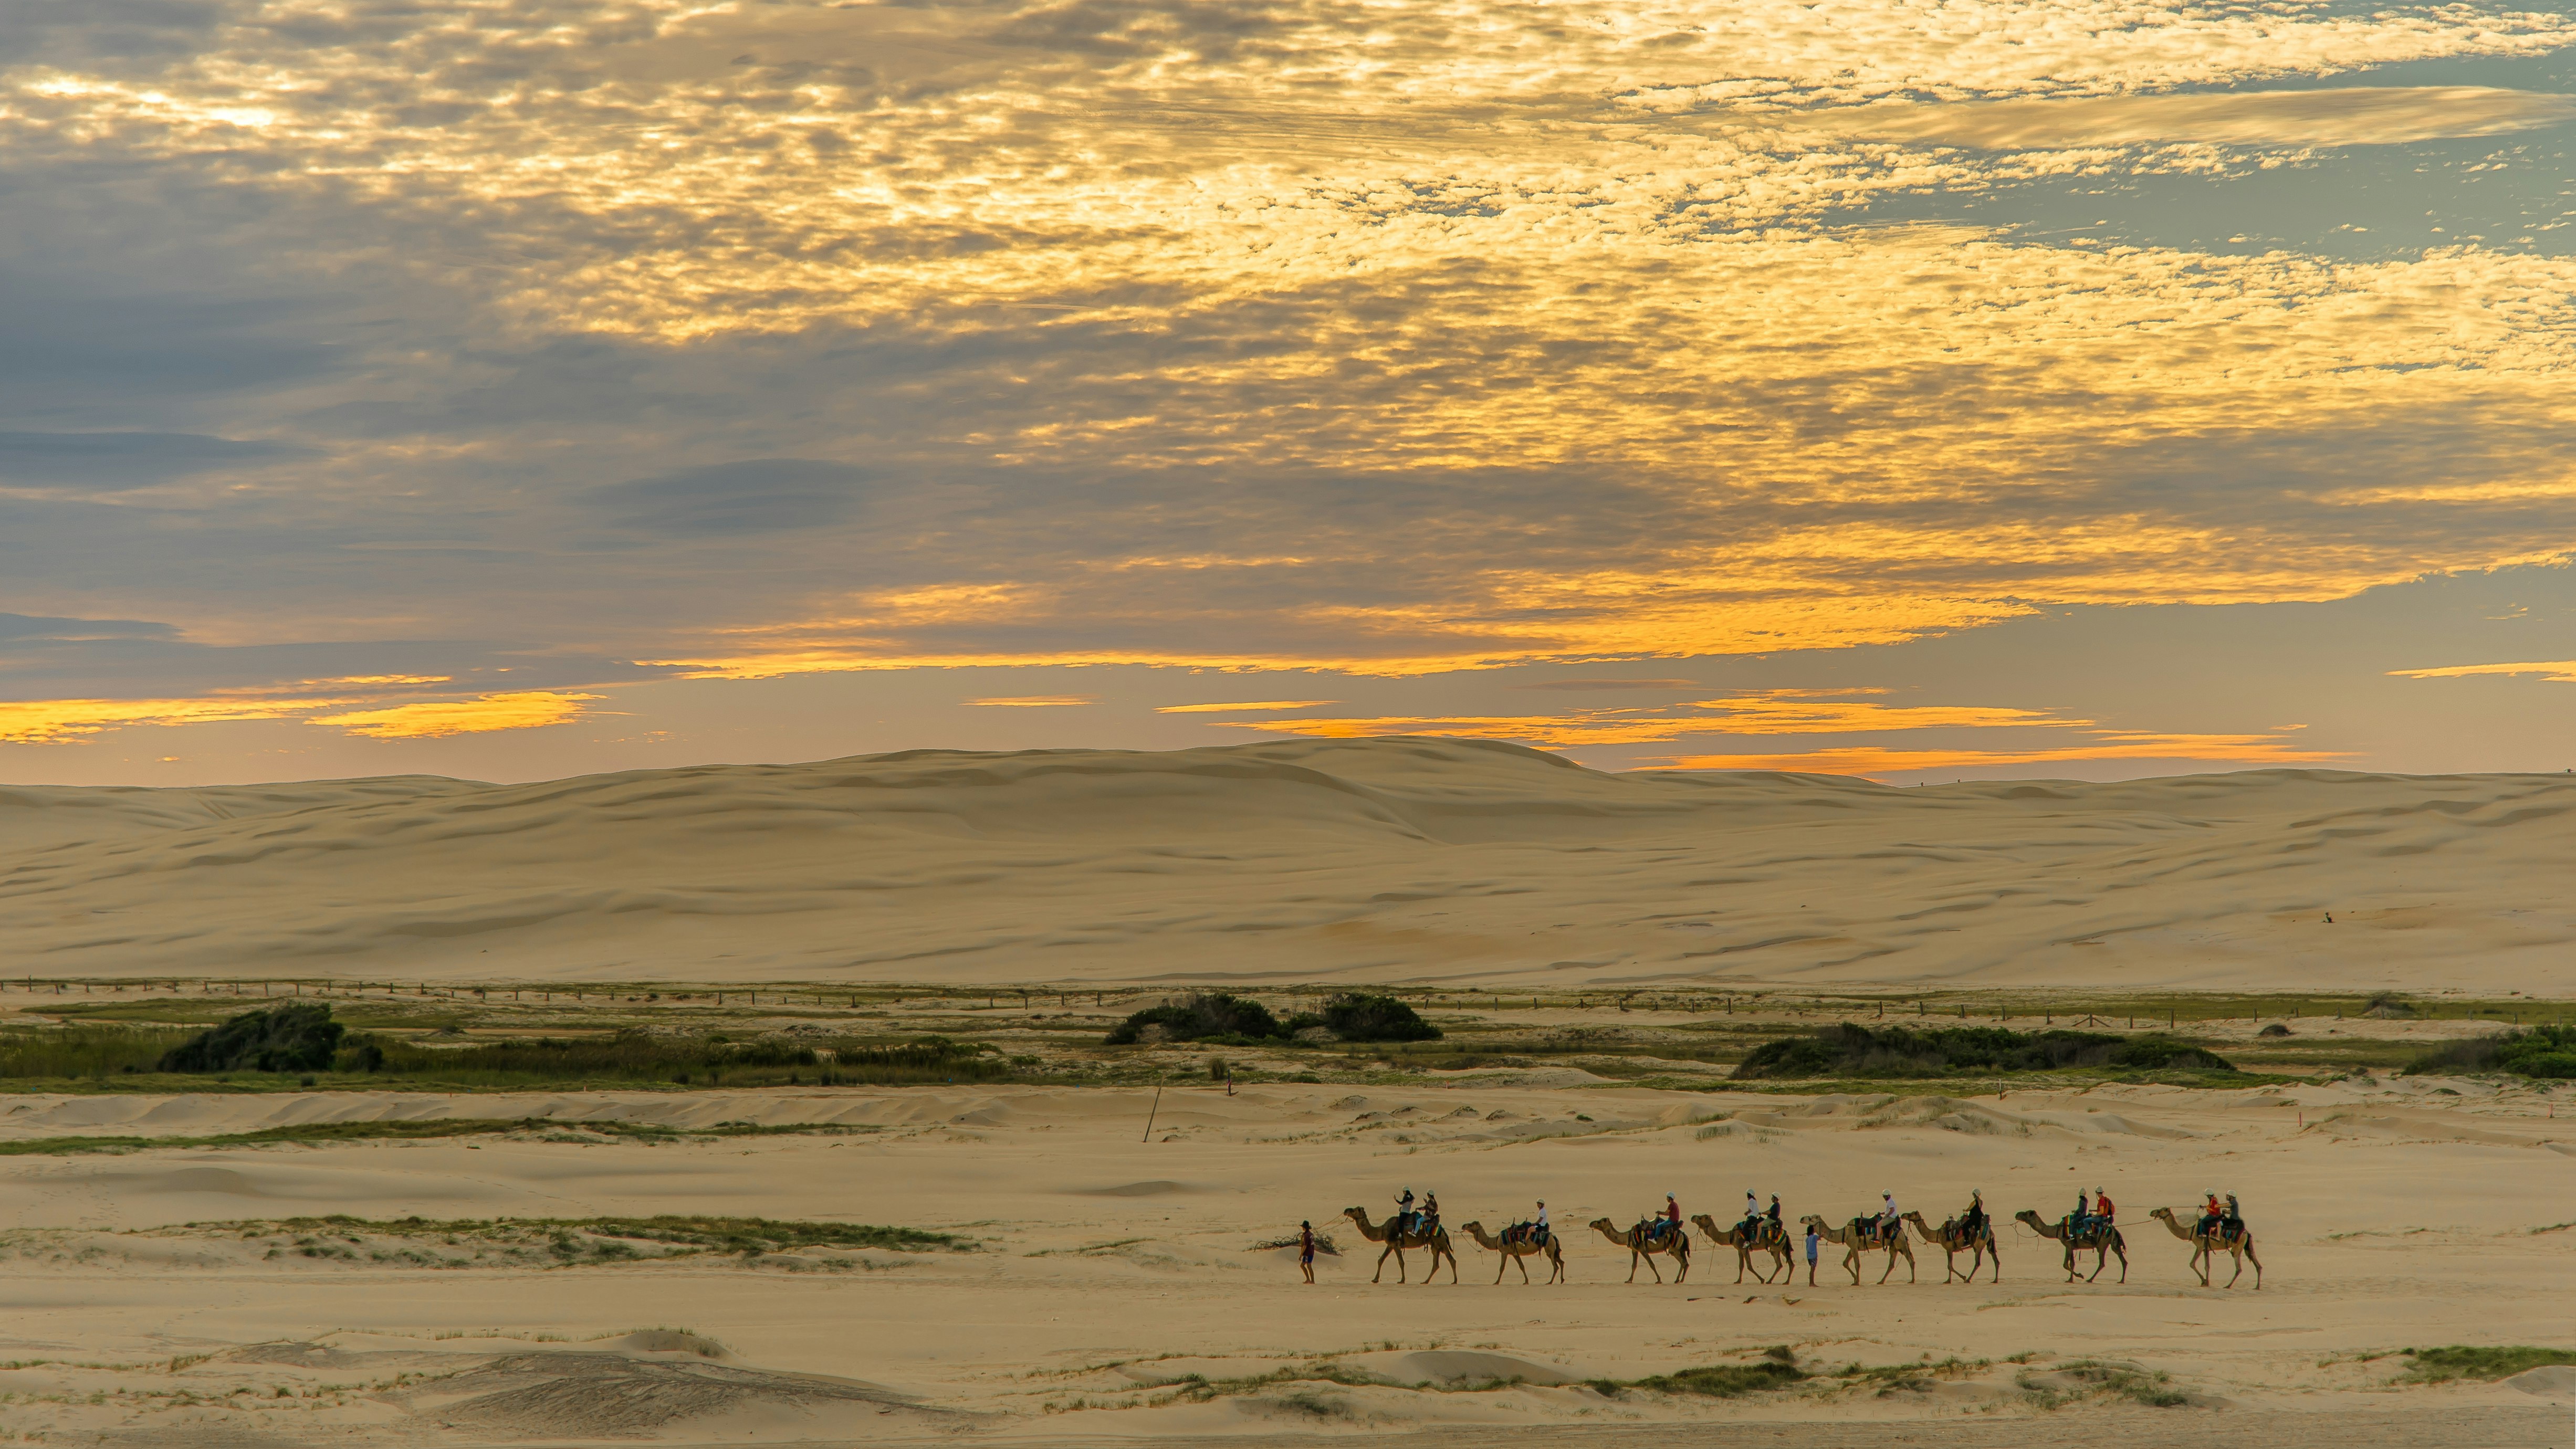 people riding on camel walking on ground at during golden hour